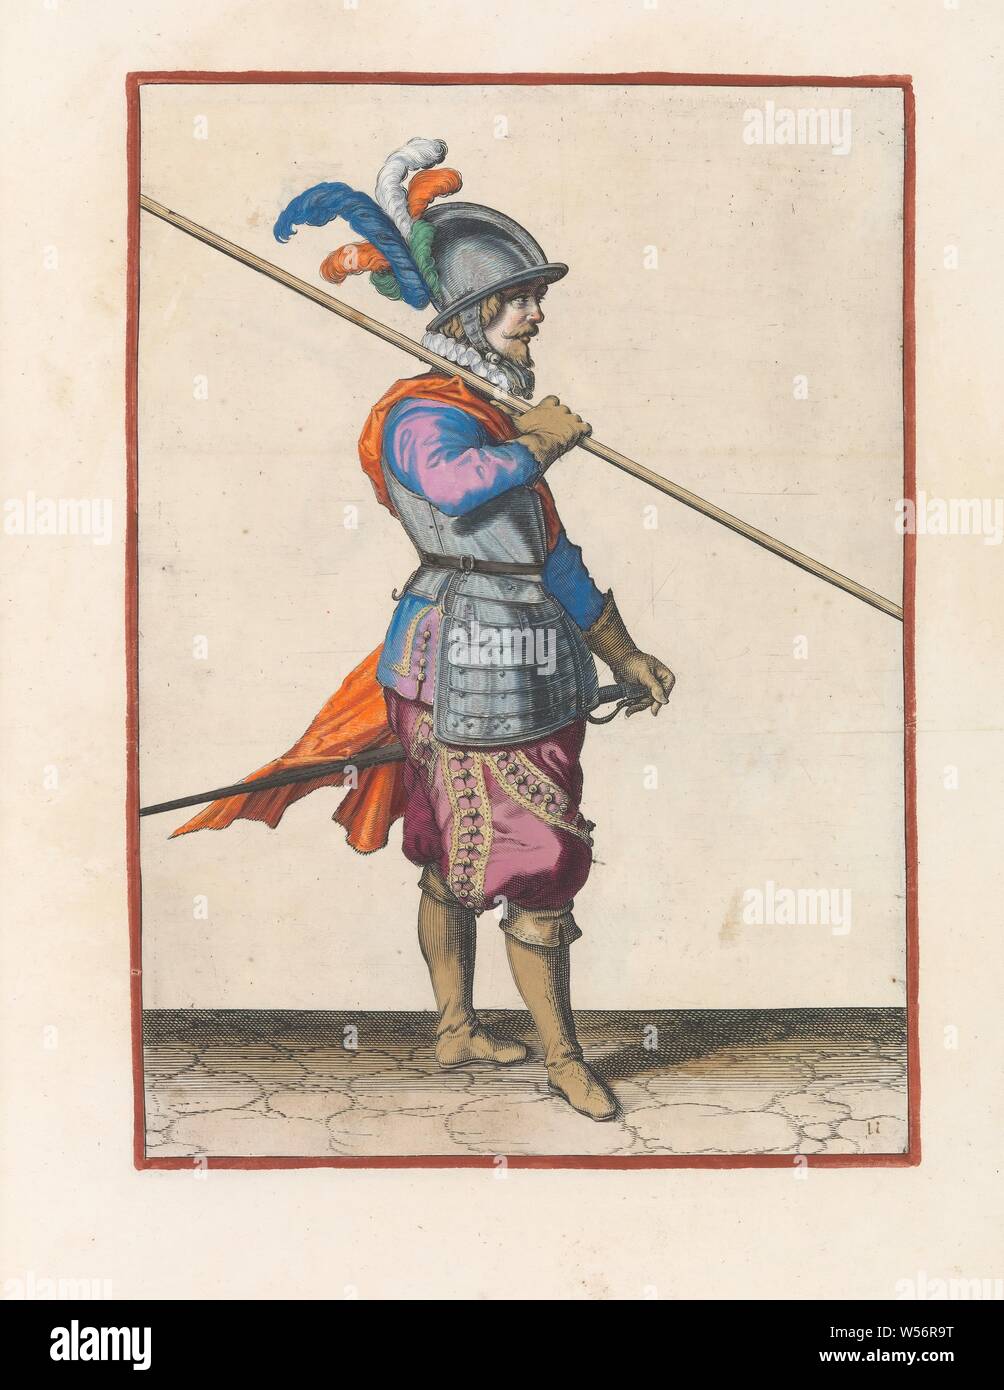 Soldier carrying his skewer on his right shoulder, the point pointed obliquely to the ground Corte onderwysinghe on the figuerliicke depiction is (original series title), A soldier, full-length, to the right, who wears a spear on his right shoulder, the point pointed obliquely to the ground. His right hand around the skewer. This print is part of the series of 32 hand-numbered prints of skewers in the Arms Act, handling of weapons, military training, helved weapons, polearms (for striking, hacking, thrusting): lance, Jacob de Gheyn (II) (workshop of), The Hague, c. 1597 - 1607, paper Stock Photo